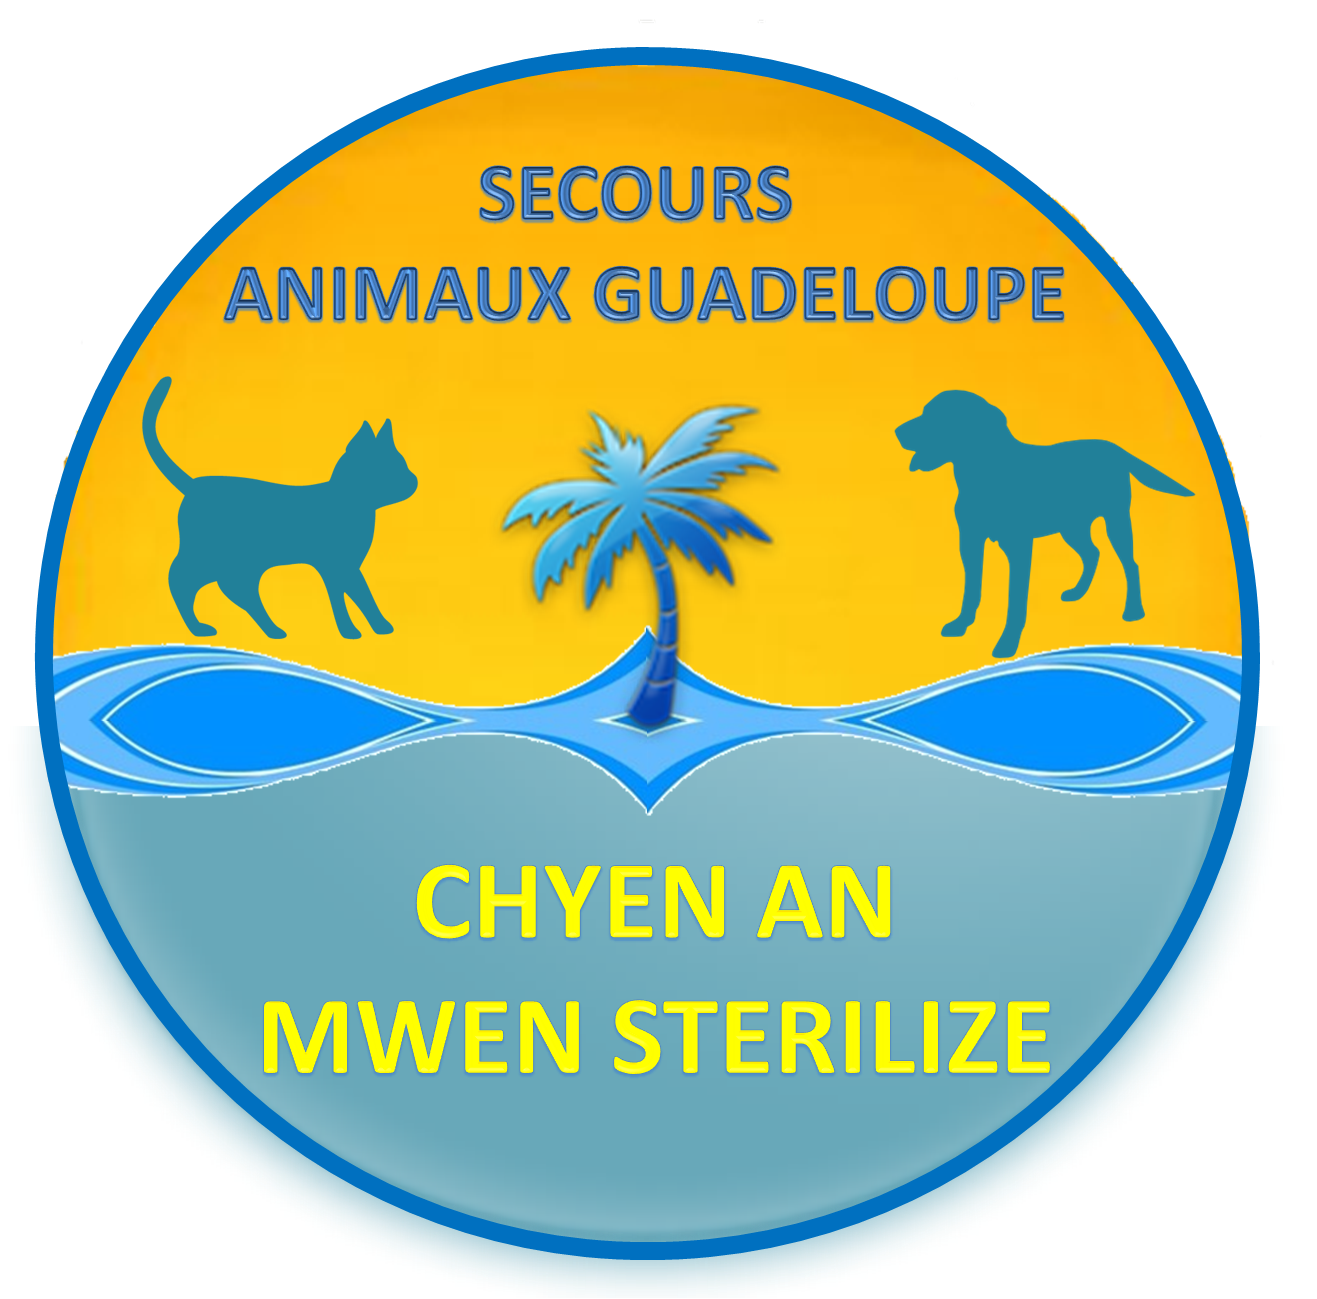 Secours Animaux Guadeloupe